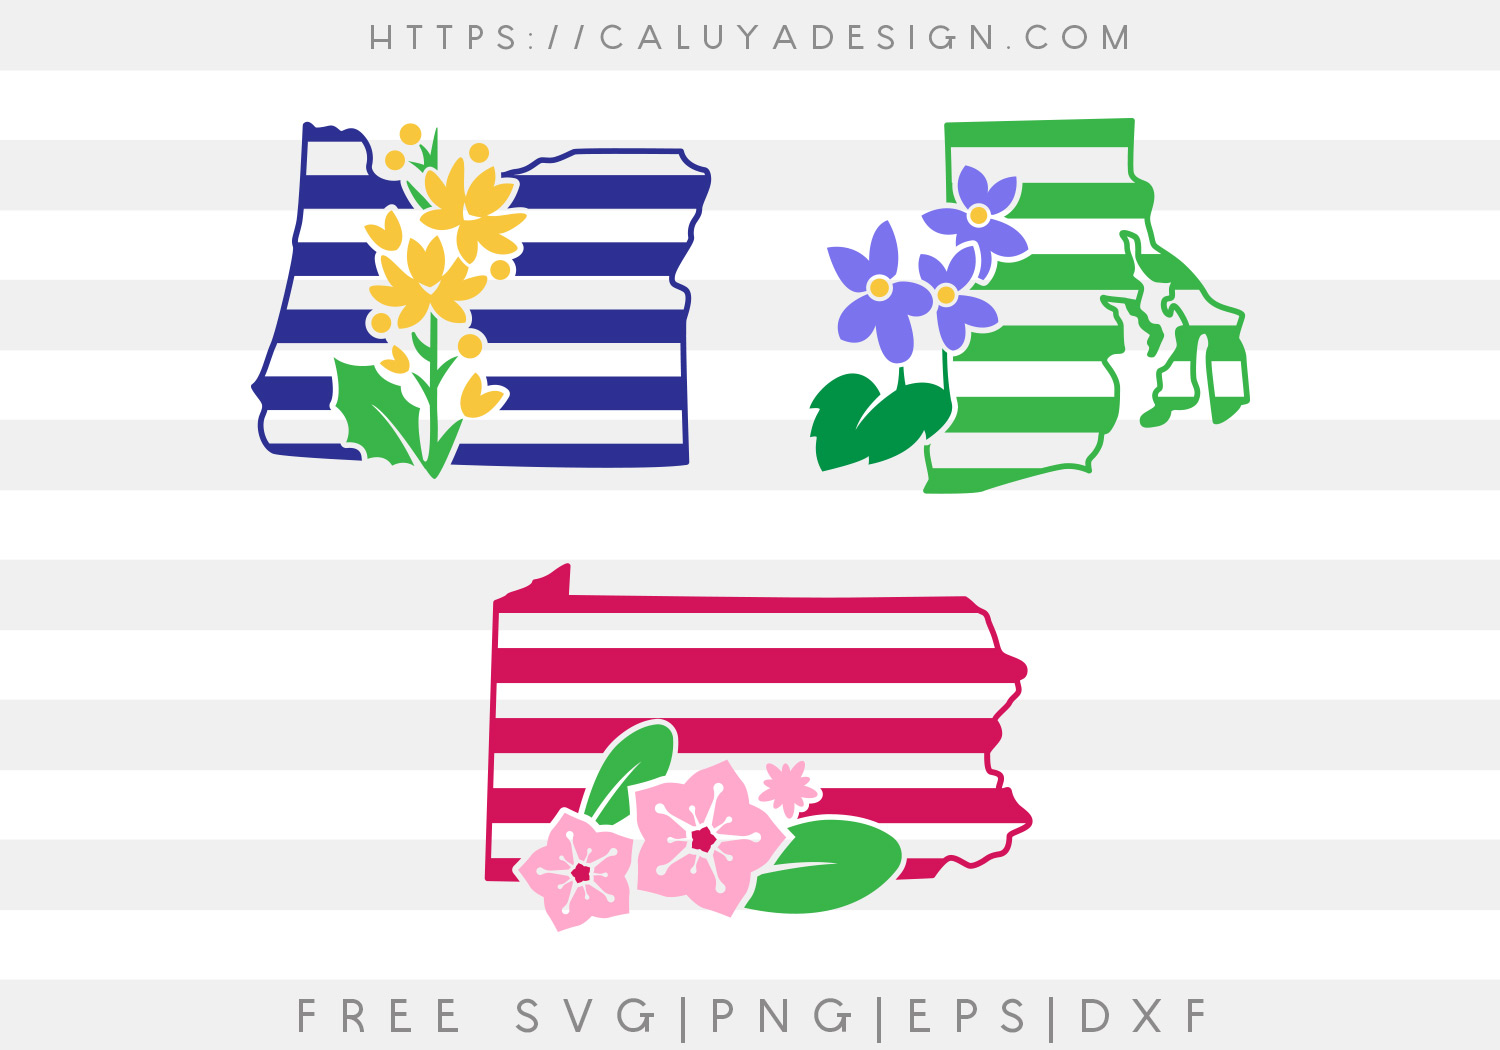 Free Oregon, Pennsylvania and Rhode Island SVG, PNG, EPS & DXF